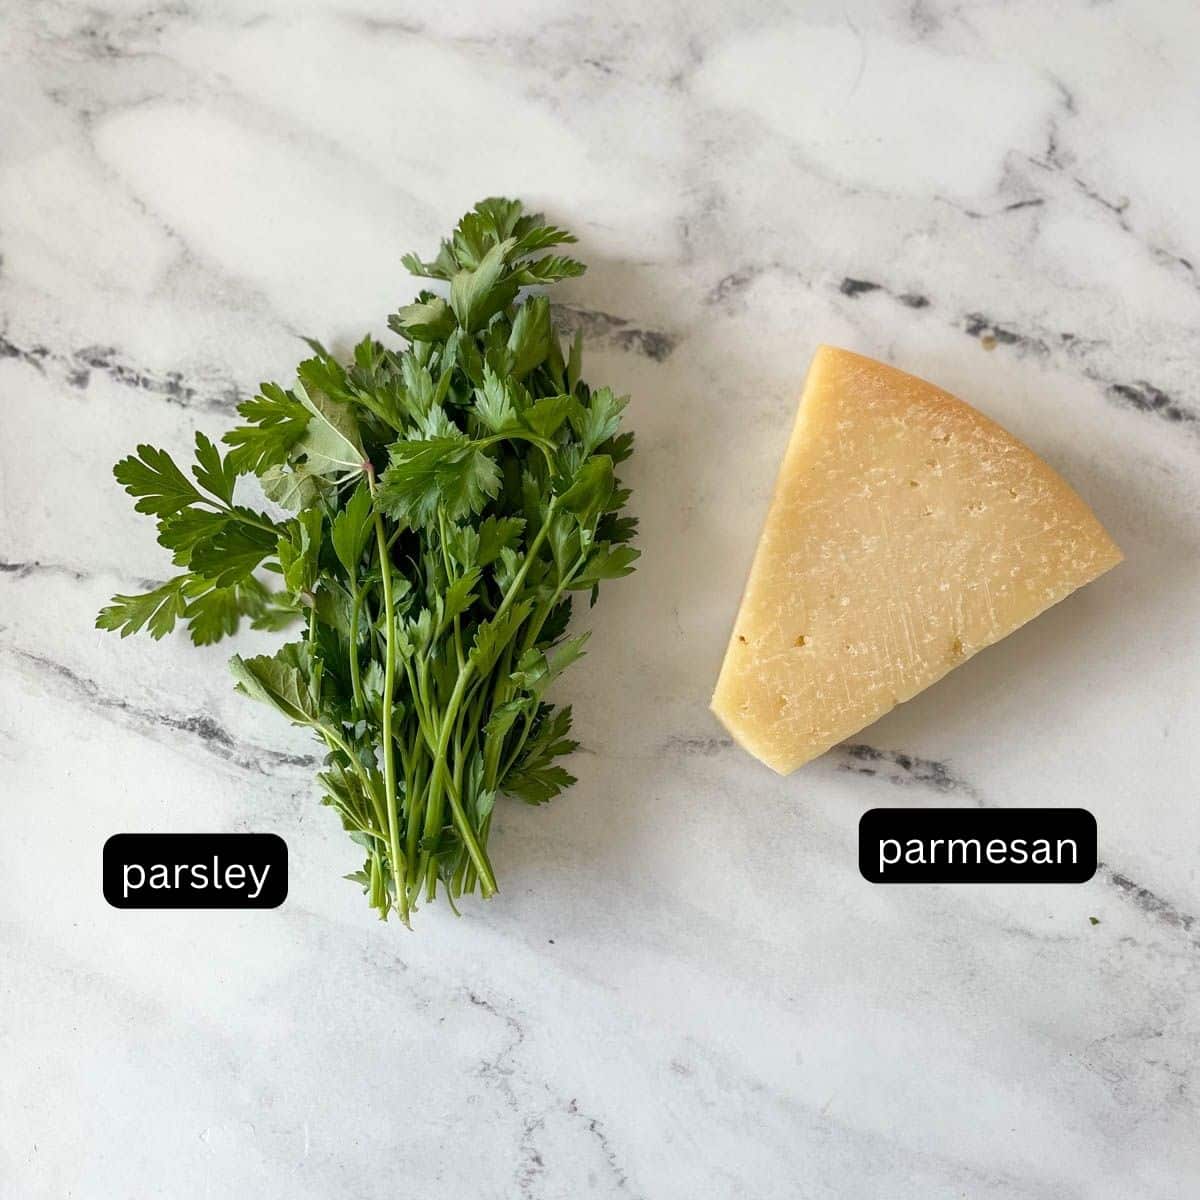 Labeled parsley and parmesan sit on a white marble counter.